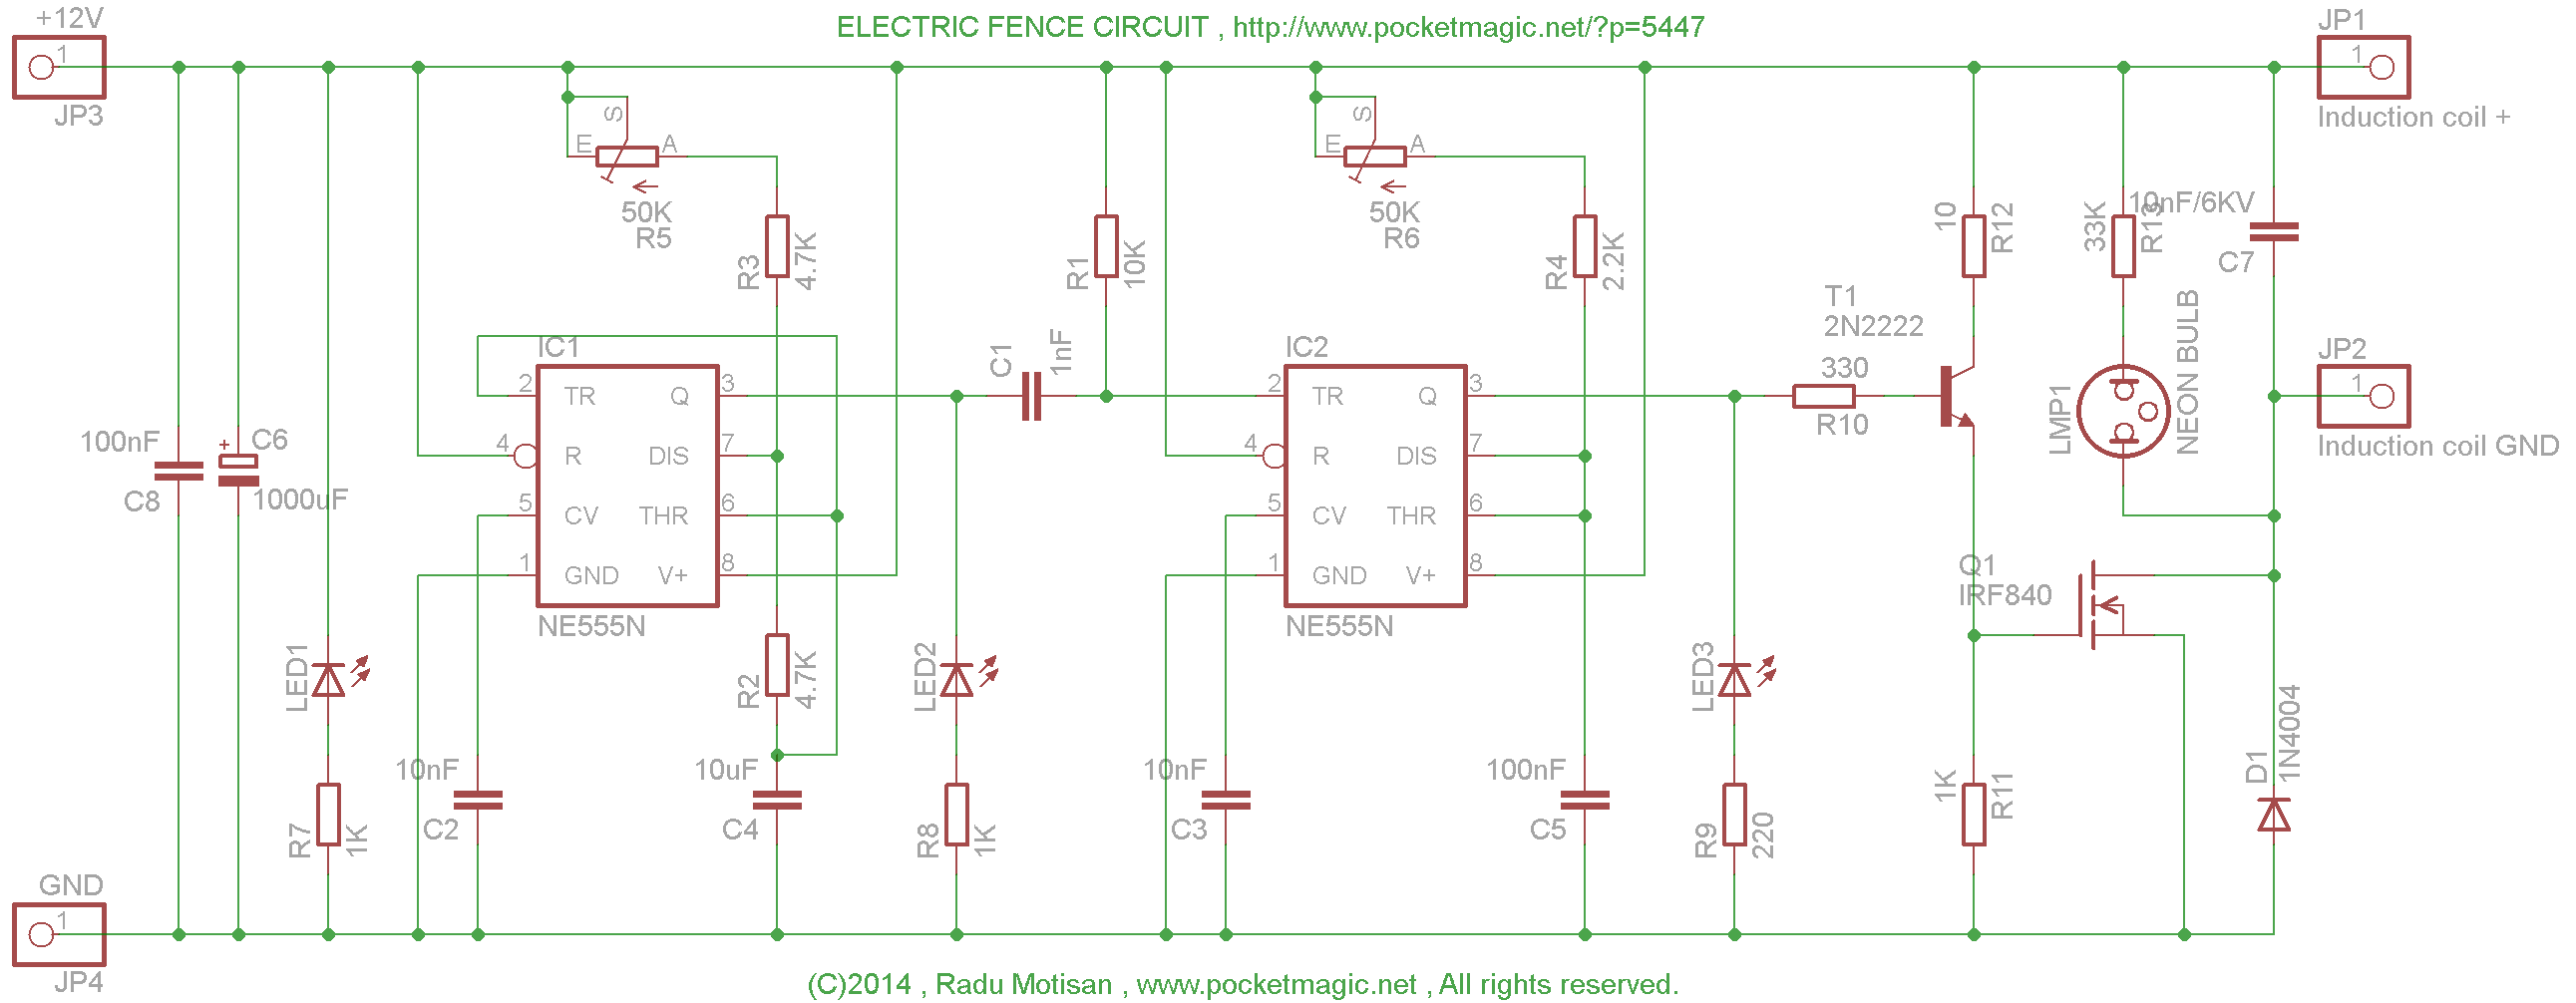 Electric Fence Circuit for perimeter